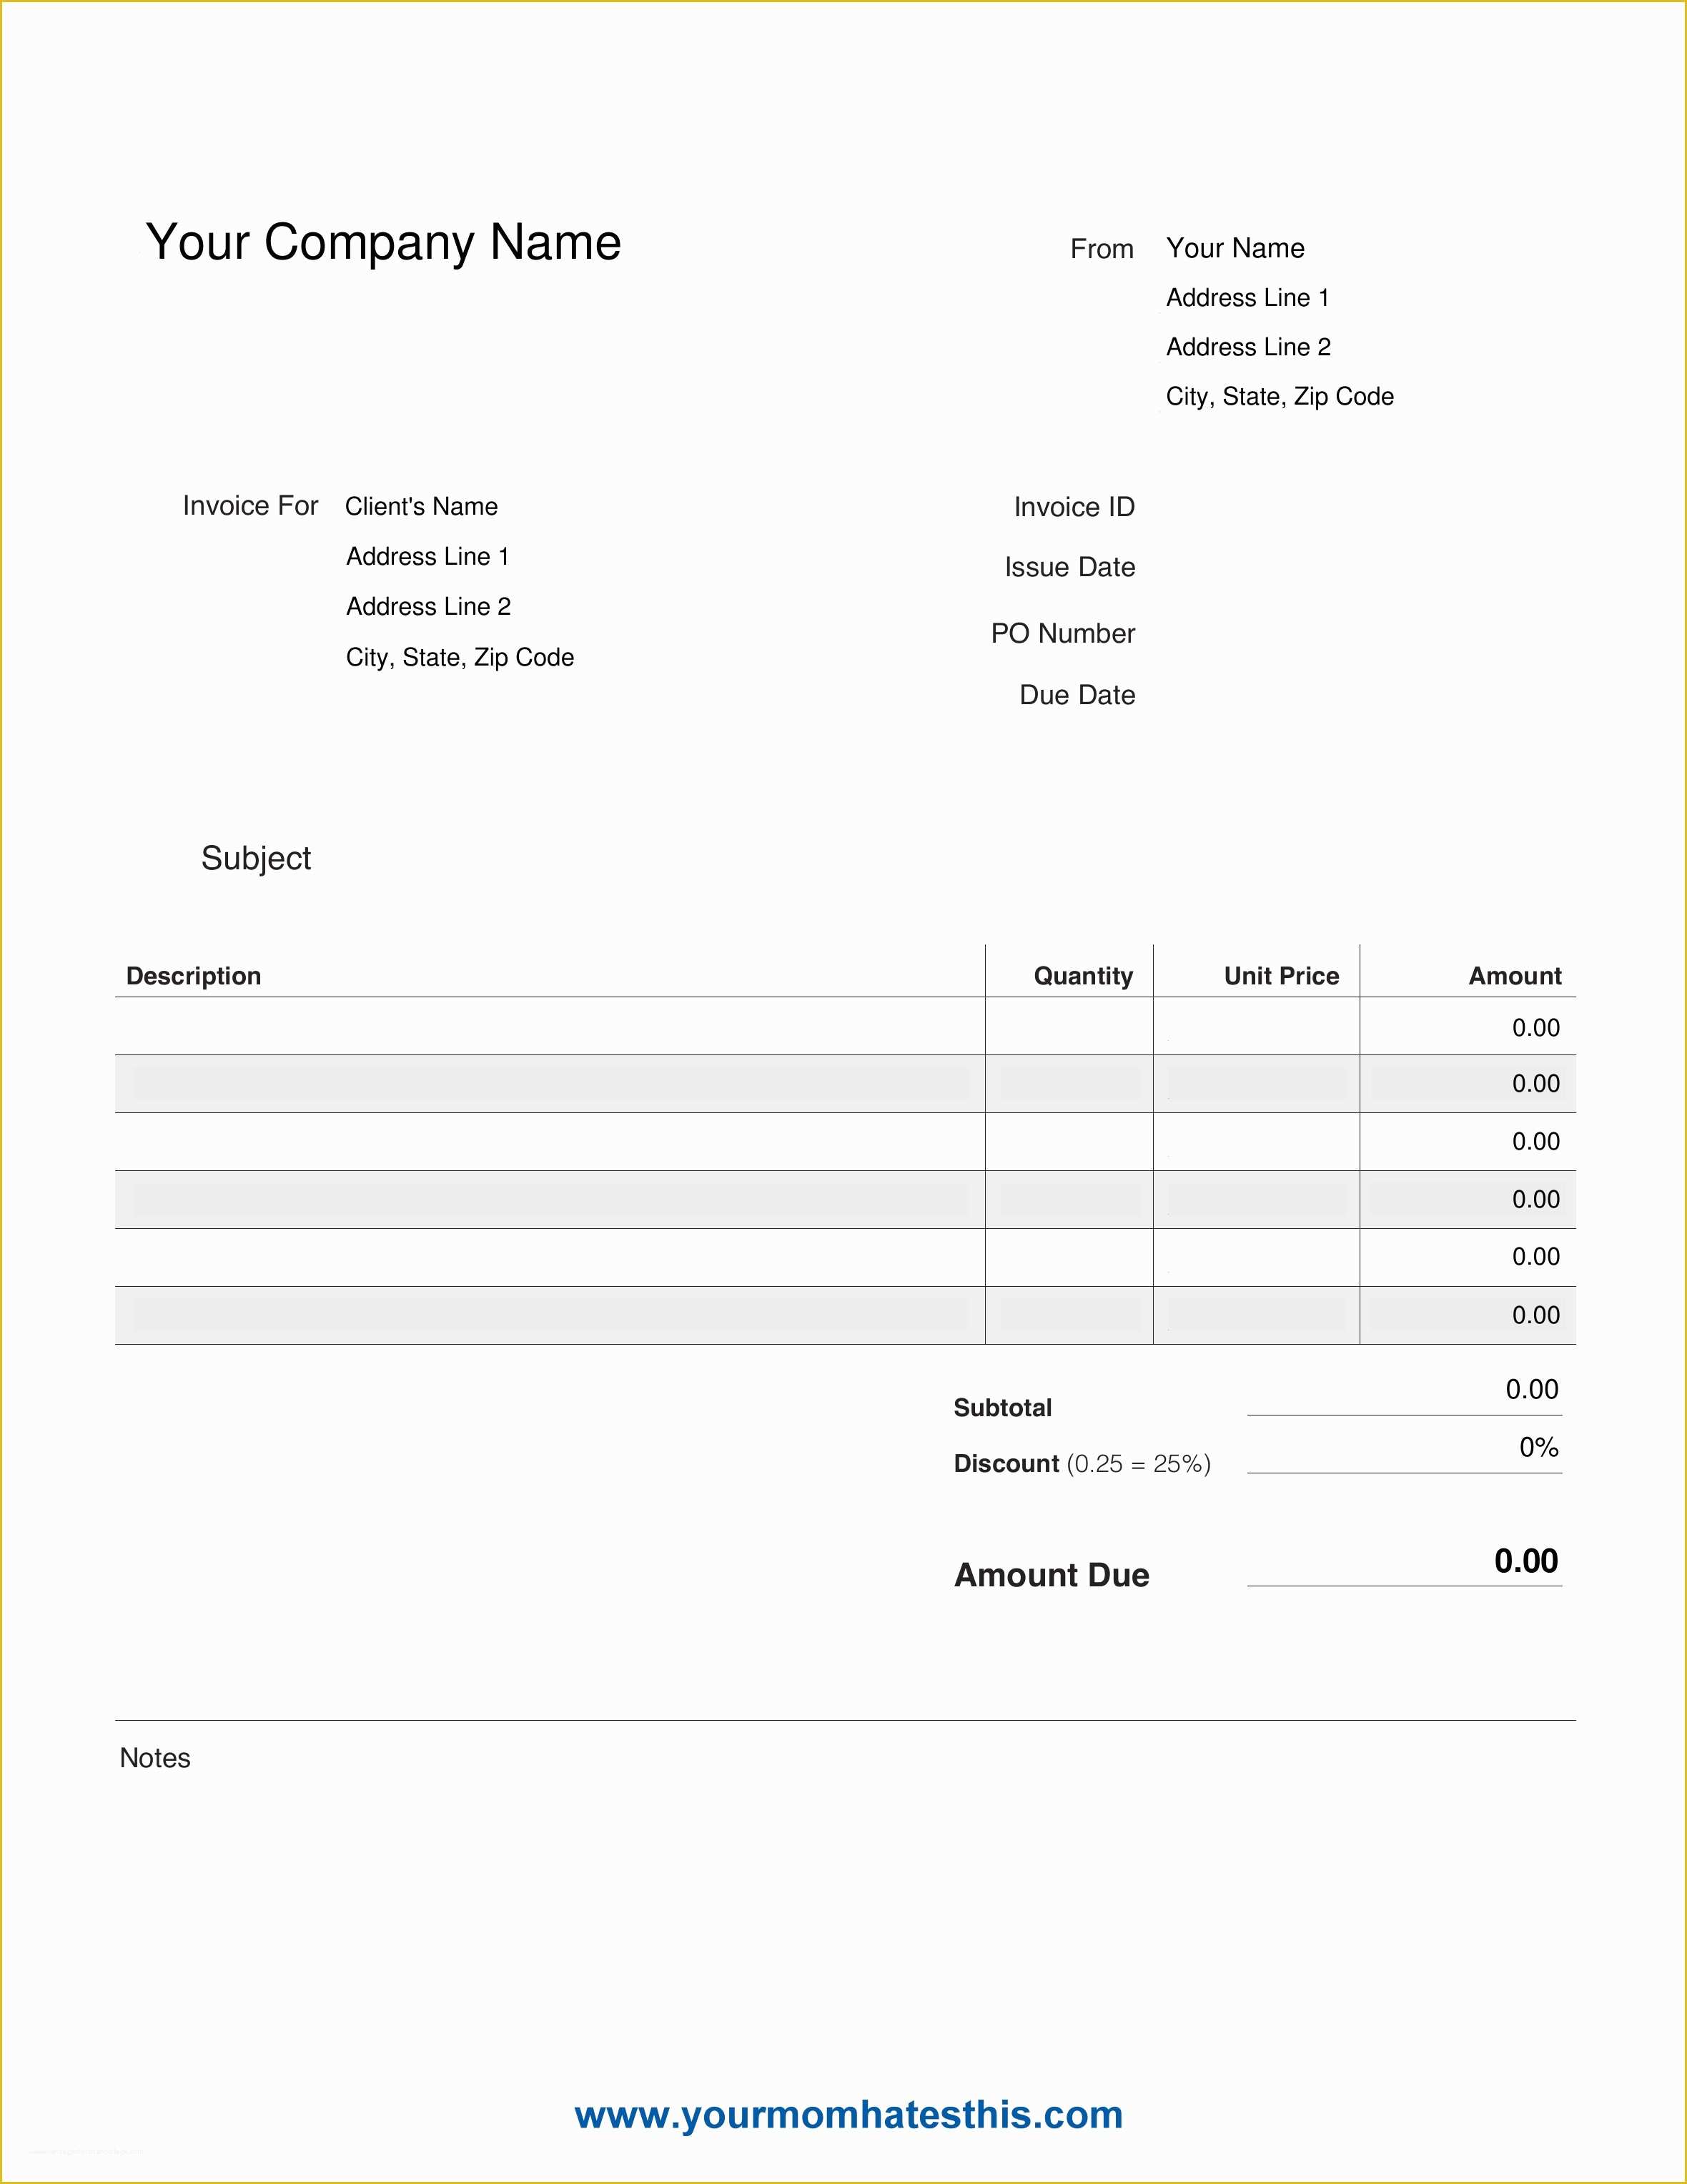 Free Online Invoice Template Of E Must Know On Business Invoice Templates